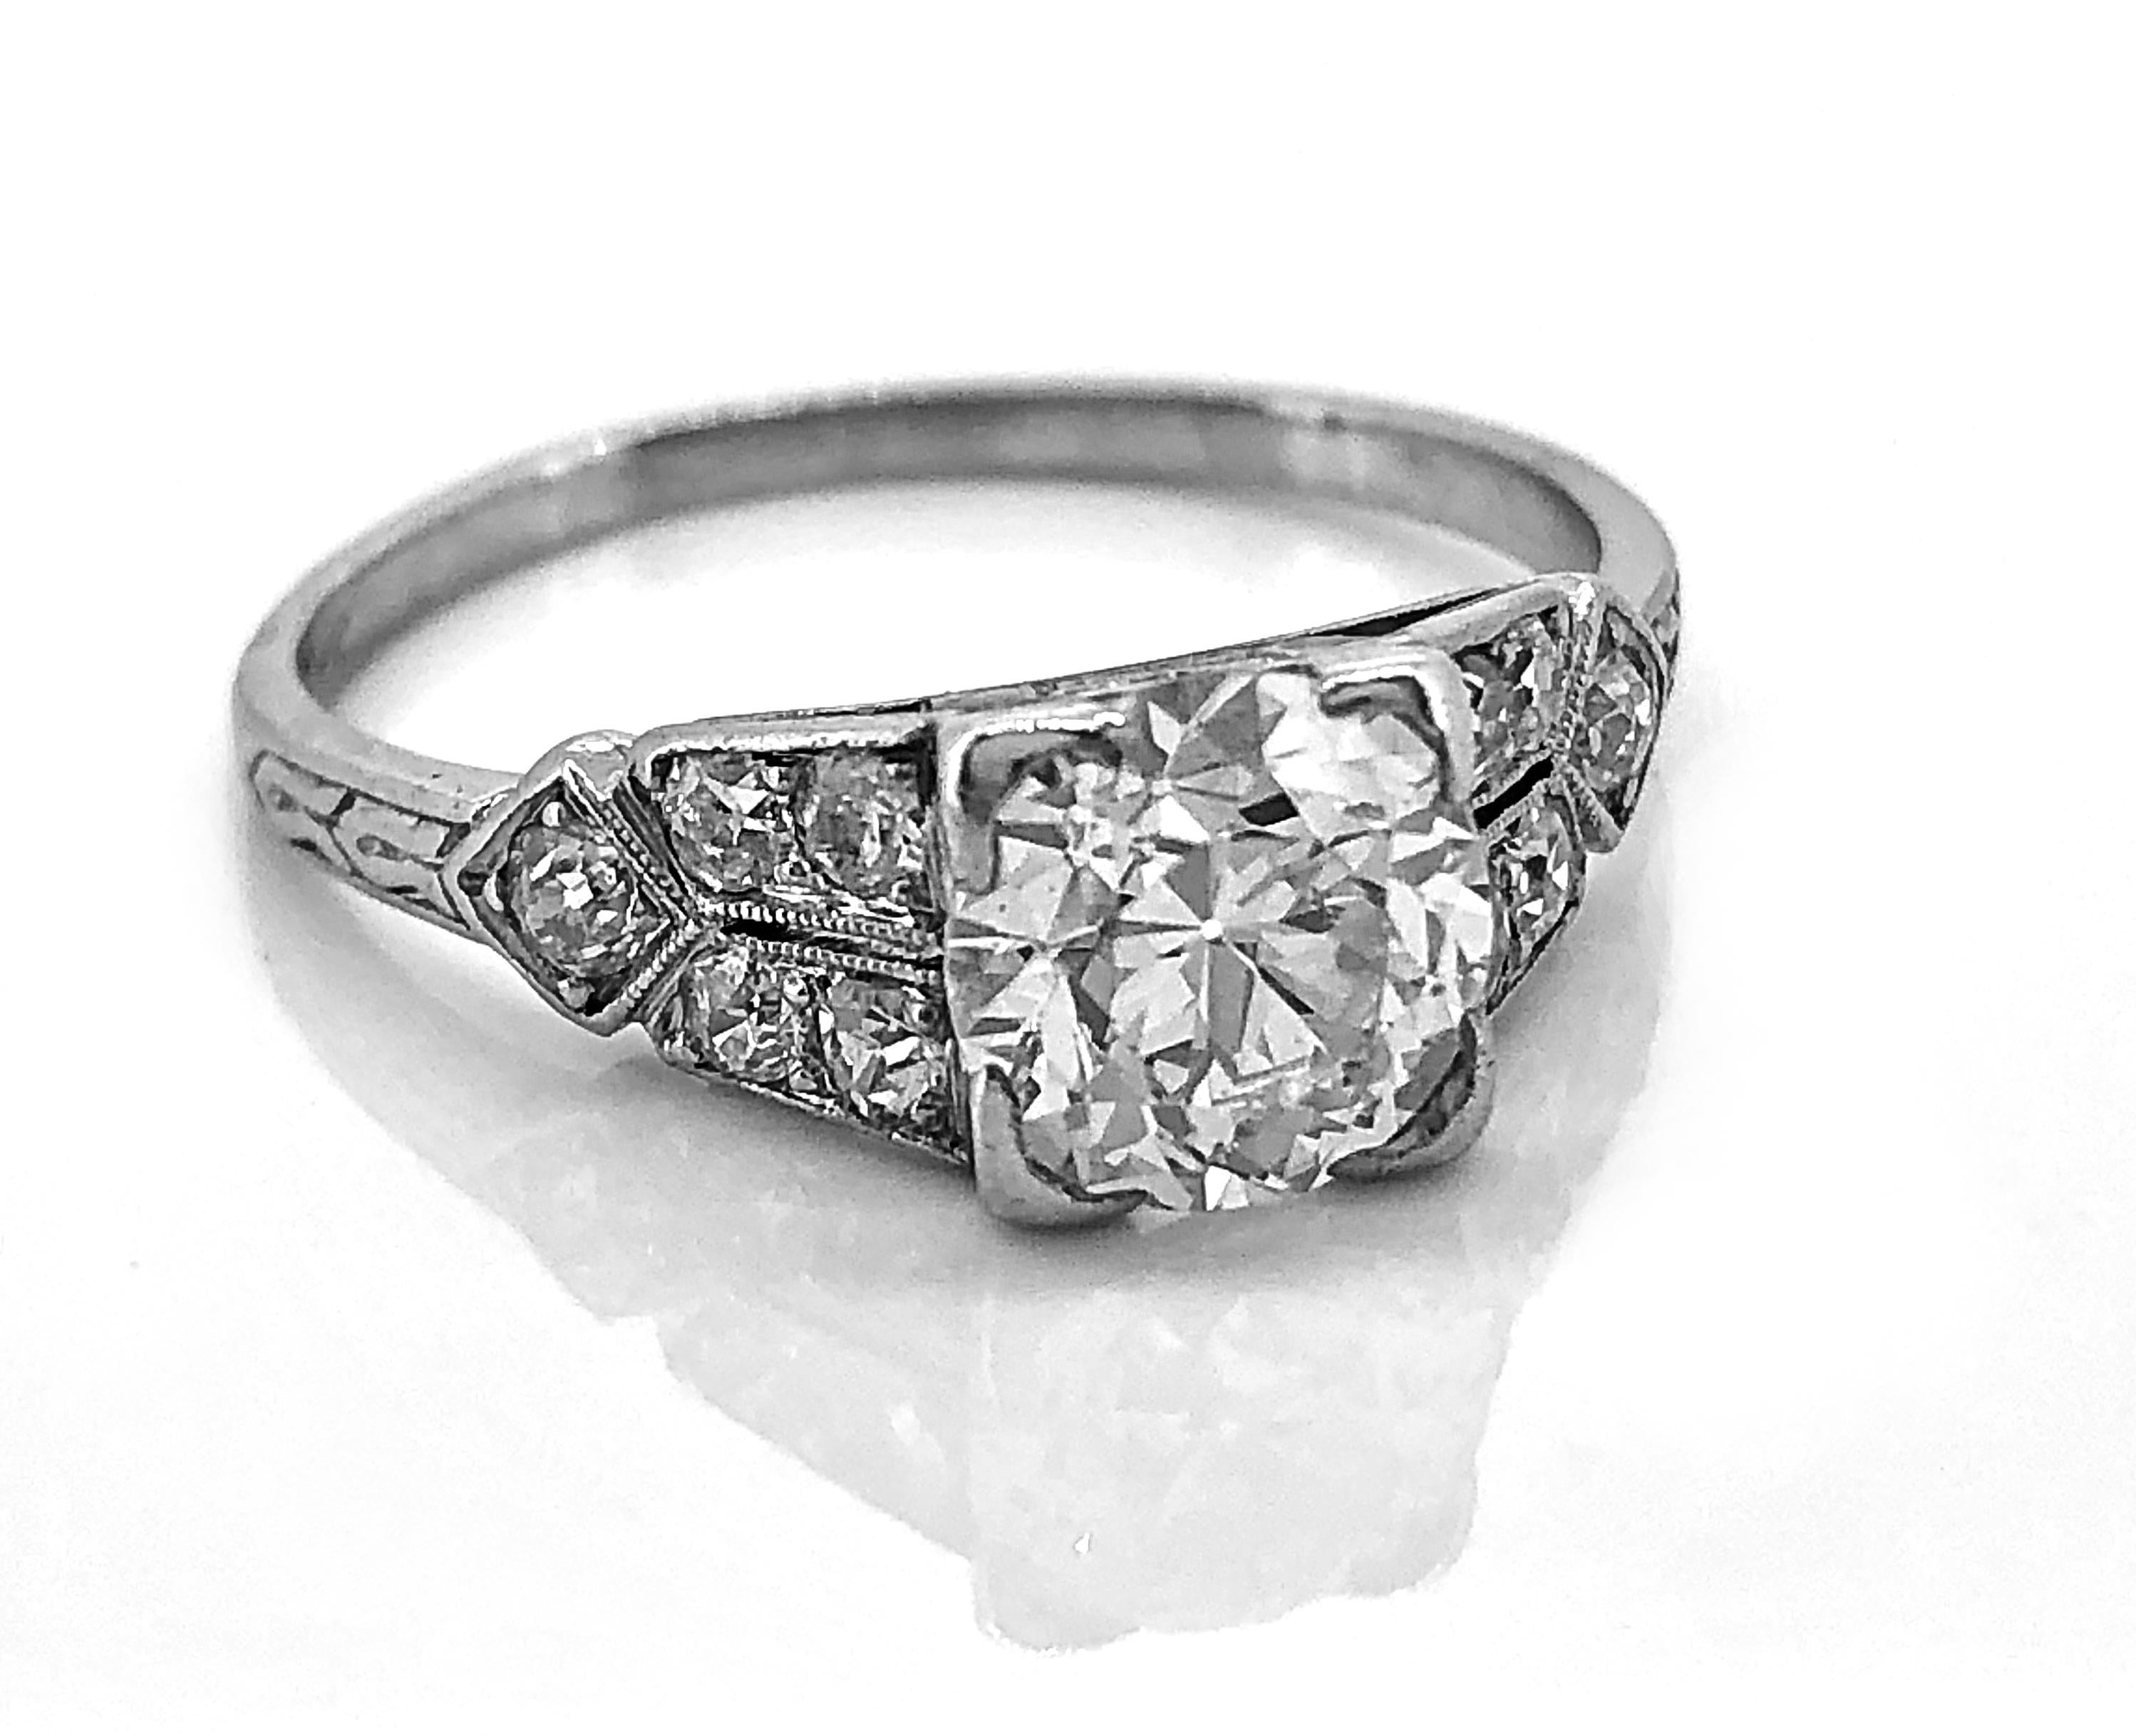 A lovely Art Deco Diamond and Platinum Antique Engagement Ring featuring a 1.16ct. apx. European cut Diamond with SI1 clarity and I color. The accenting .30ct. T.W. apx. diamond melee are set in a split shank style making a lovely and crisp design.